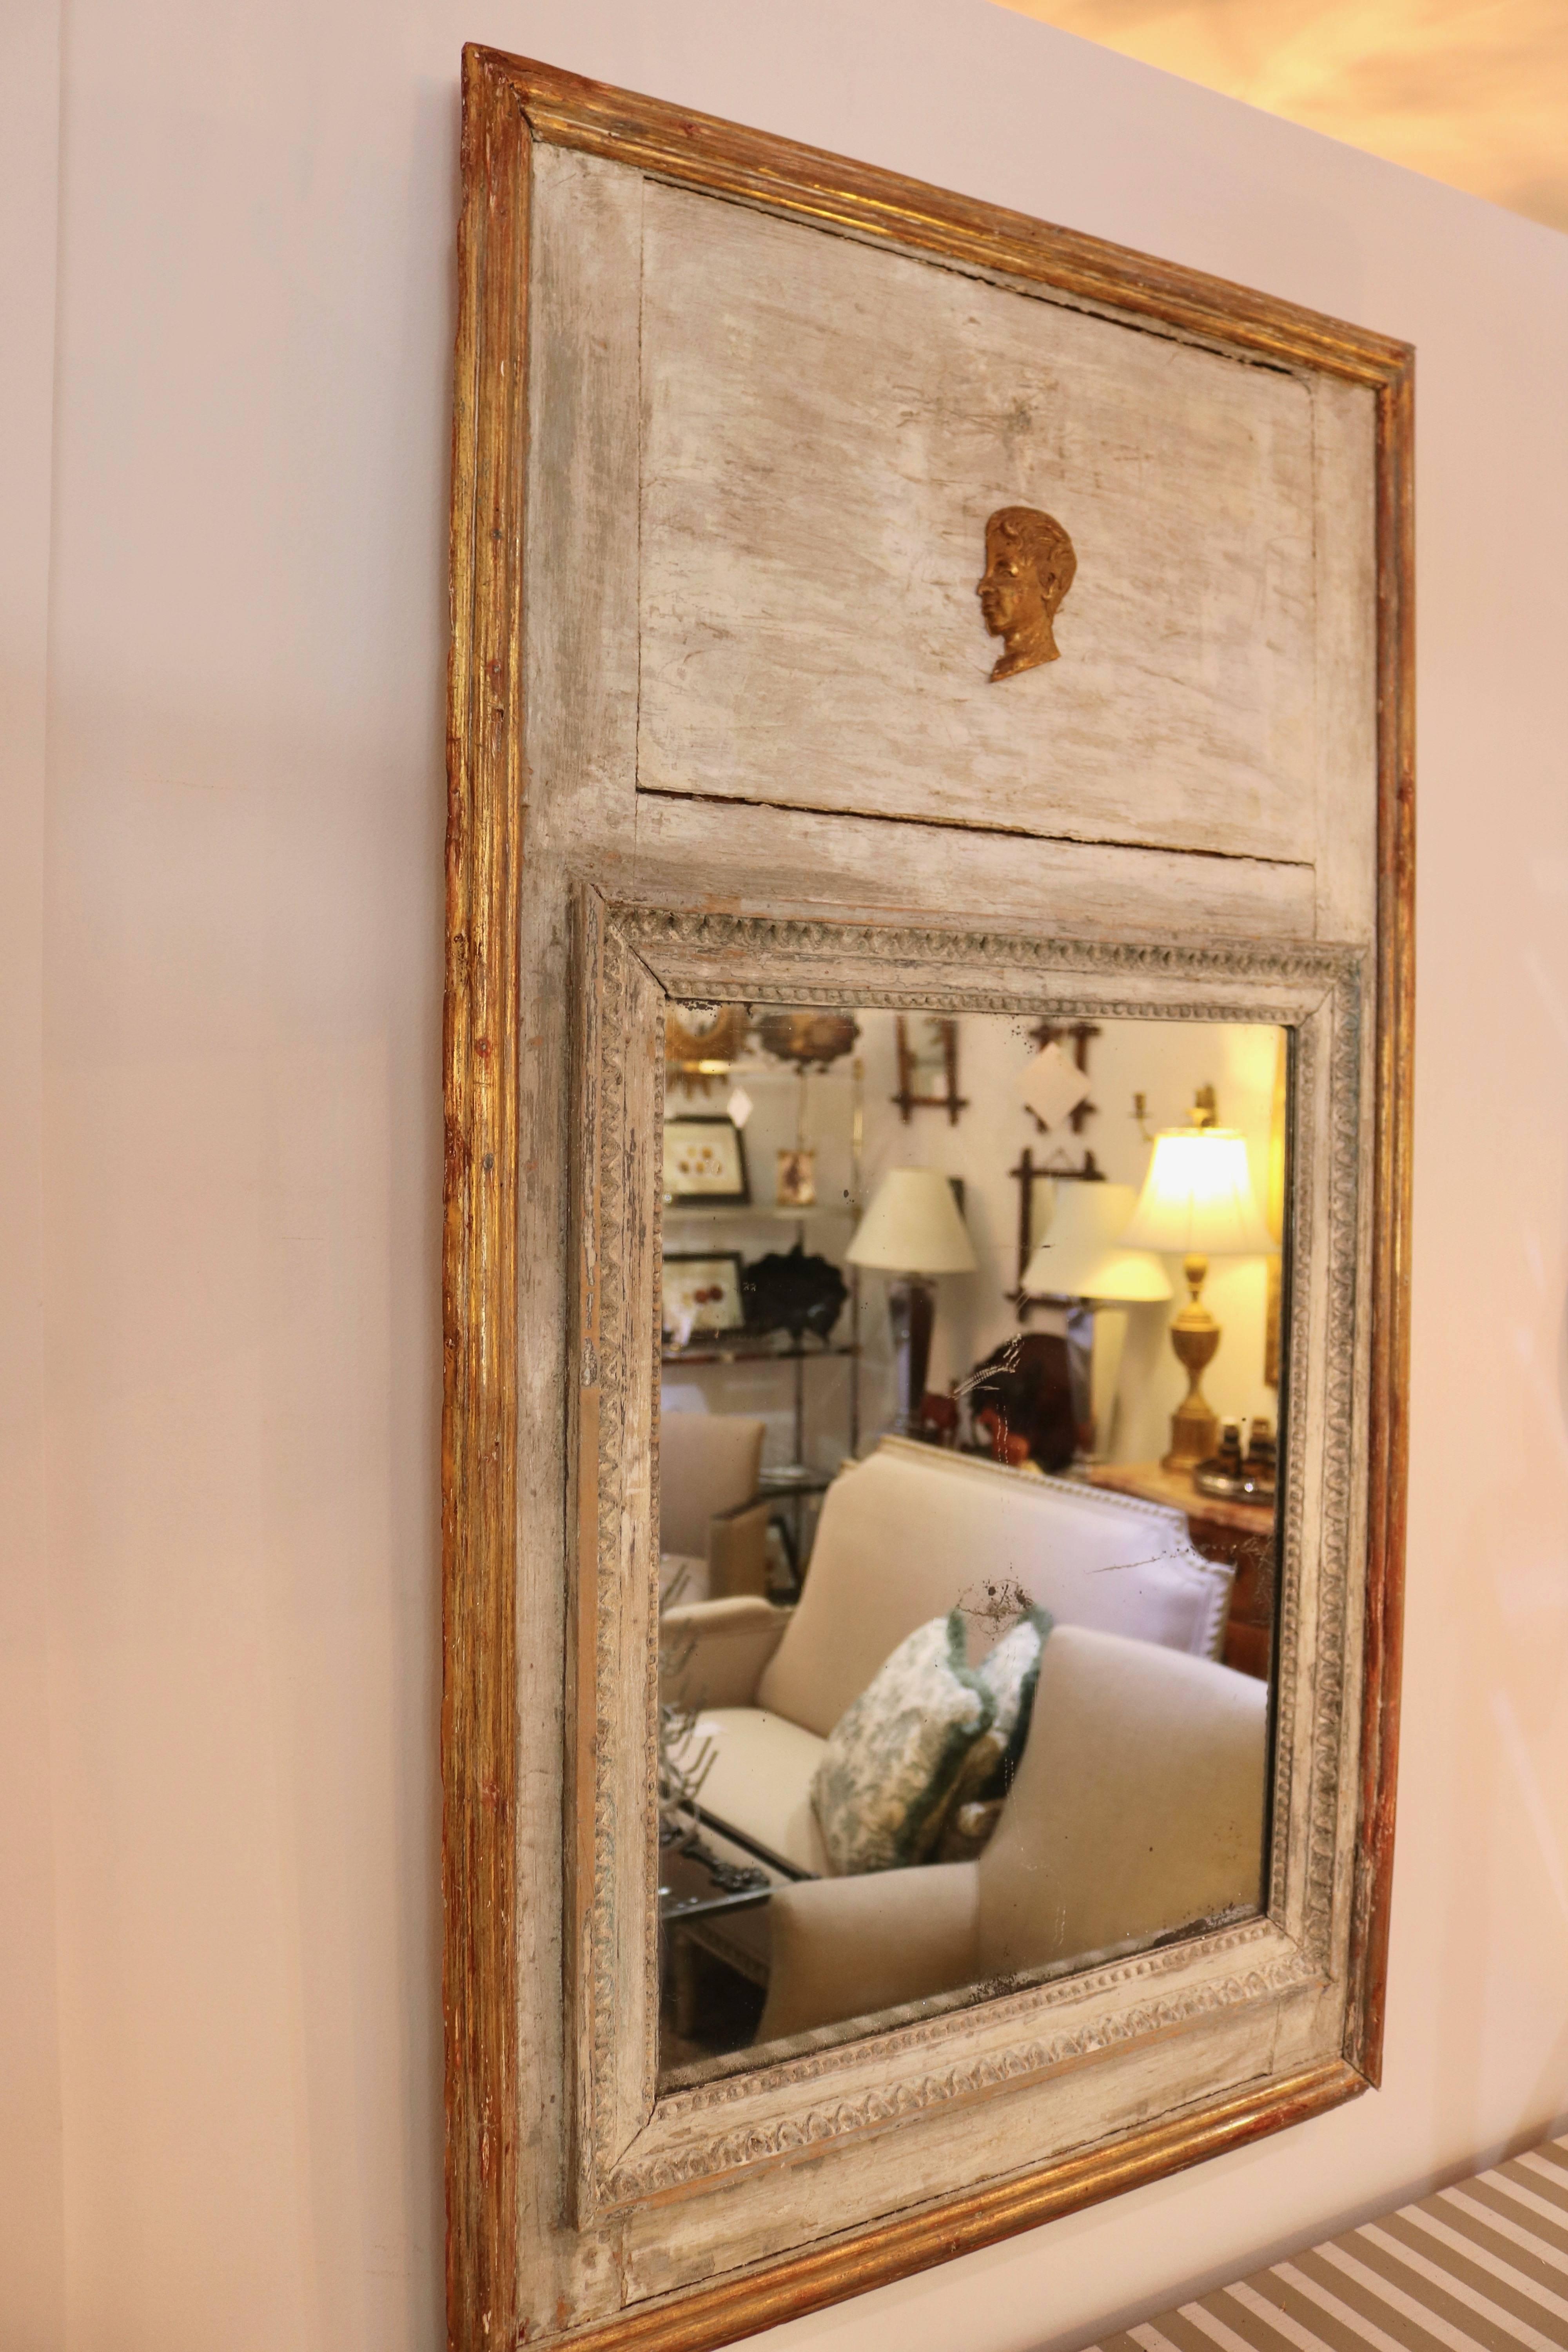 This charming trumeau mirror dates from the 1820s and was recently purchased in London. The pieces retains its original mirror which does show oxidation of the silver backing (see image #8). The soft gray paint compliments the gilt gold moulding and